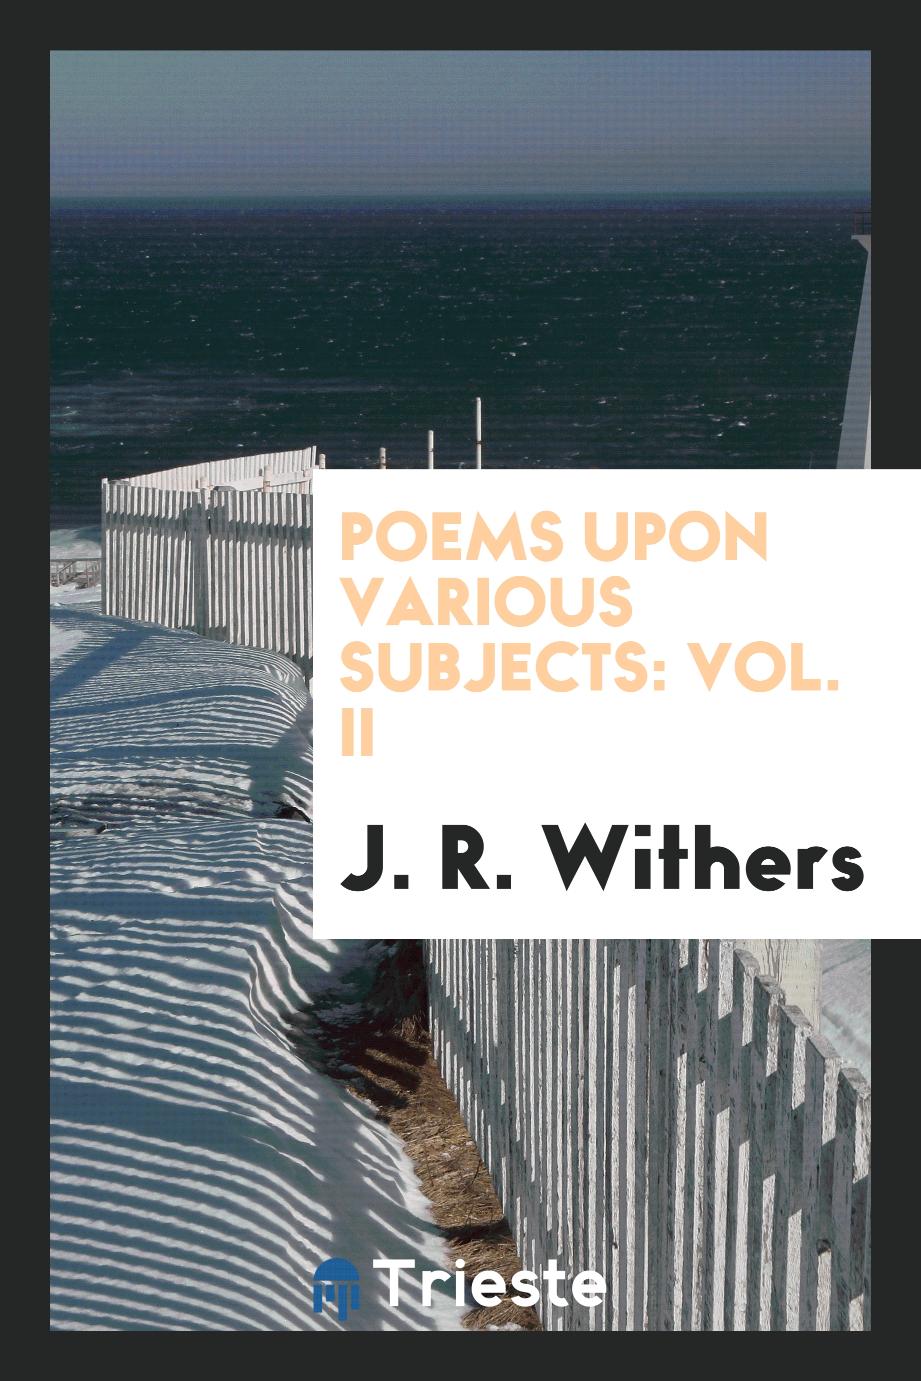 Poems Upon Various Subjects: Vol. II